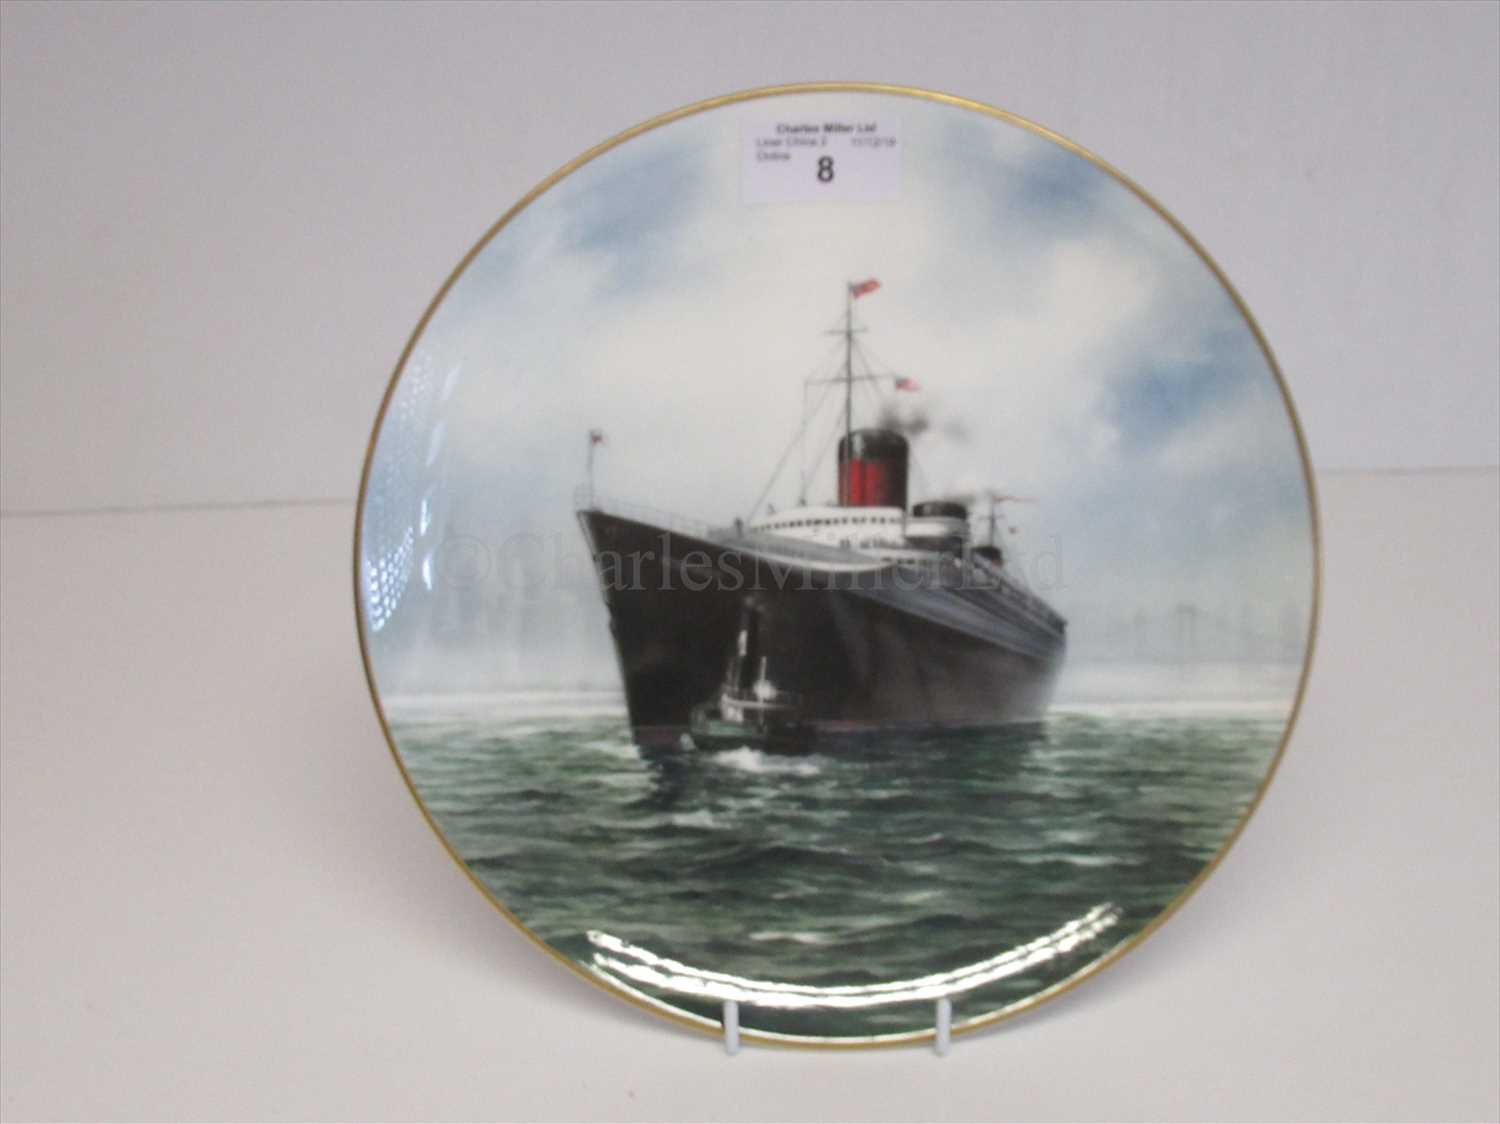 Lot 8 - Blue Riband Liners: A souvenir picture plate of Normandie